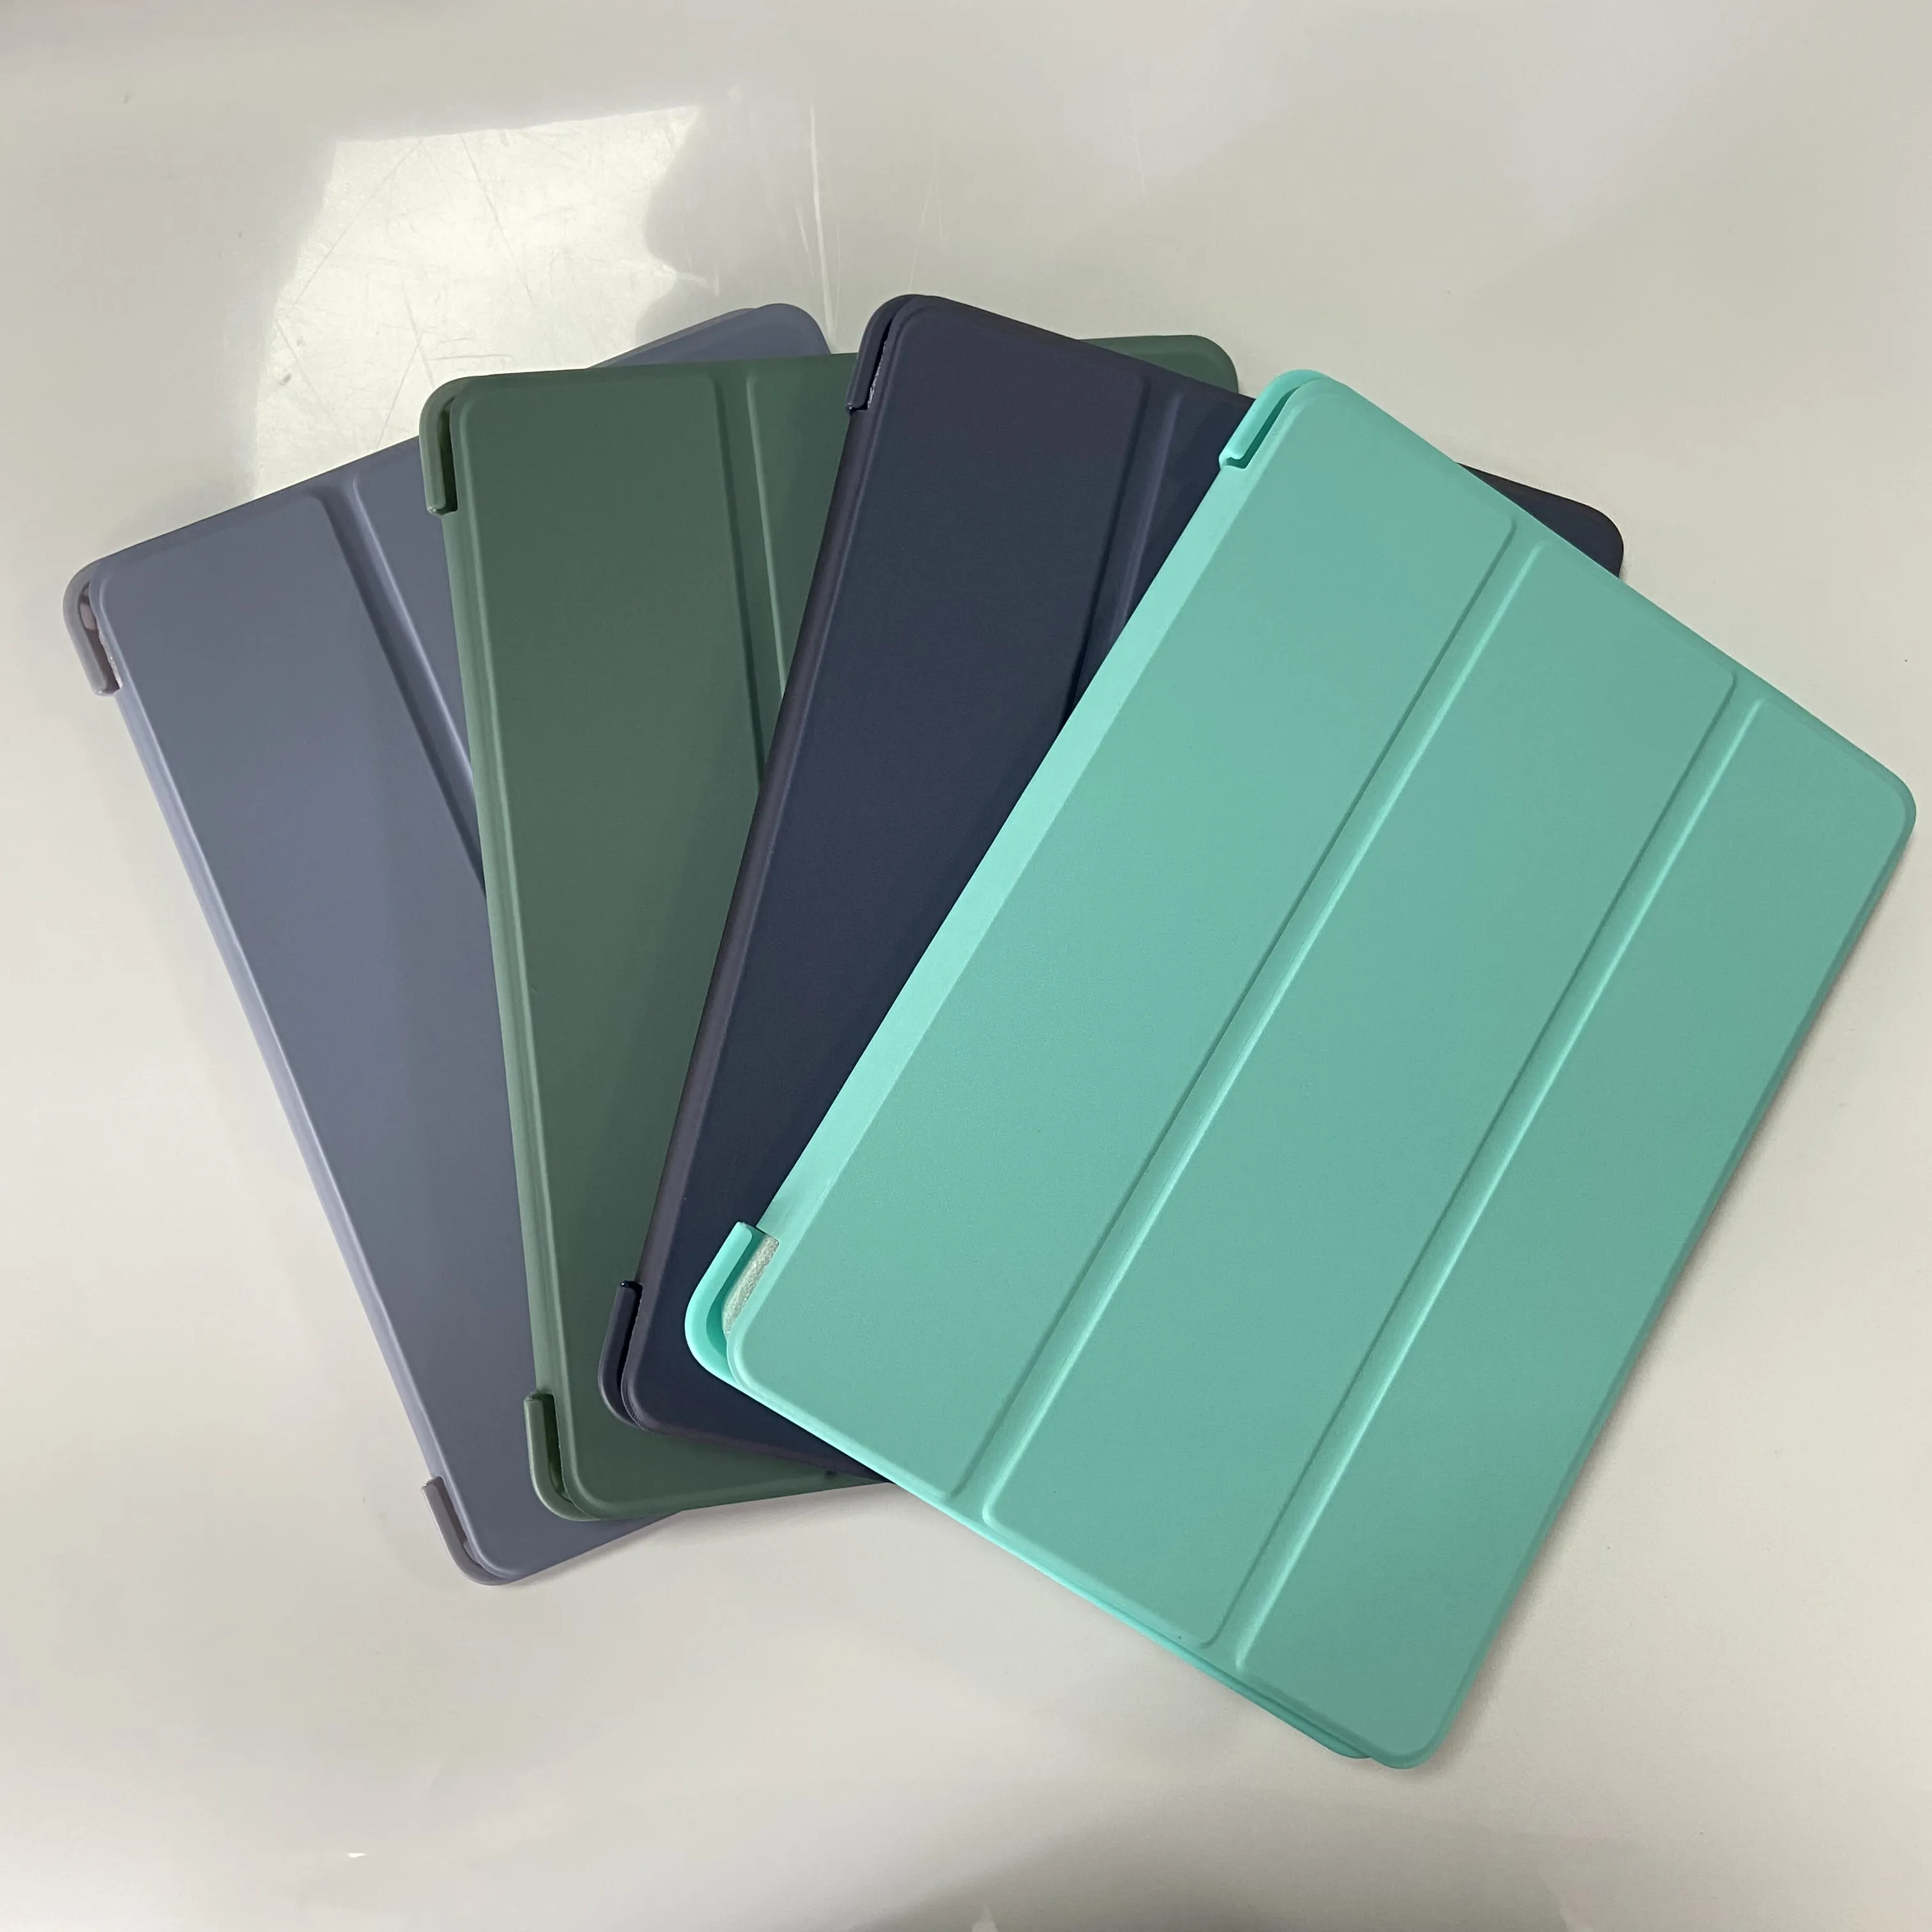 Pencil Holder Case Soft TPU PU Leather for Ipad 5/6 Case Ce Shockproof Waterproof Dustproof Cover Total 13 Colors